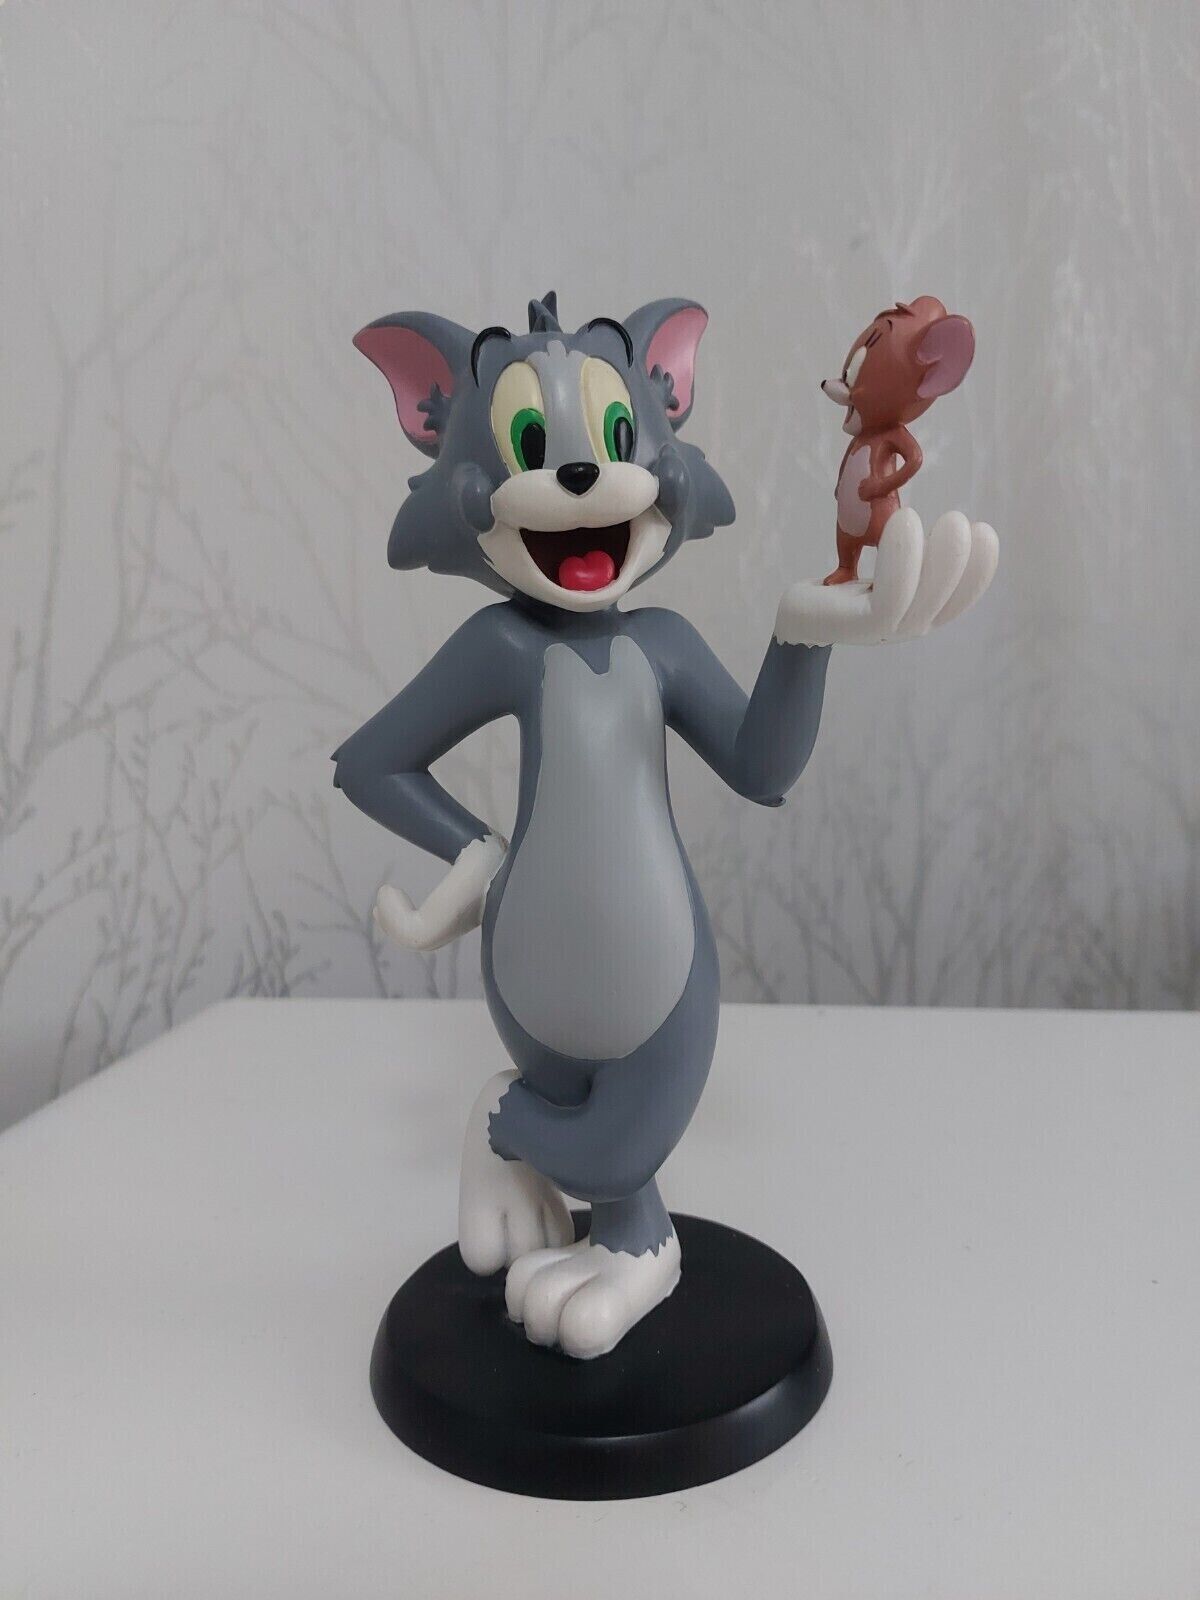 Classic Tom And Jerry Statue - TM & Turner Entertainment Co. (Warner Bros)